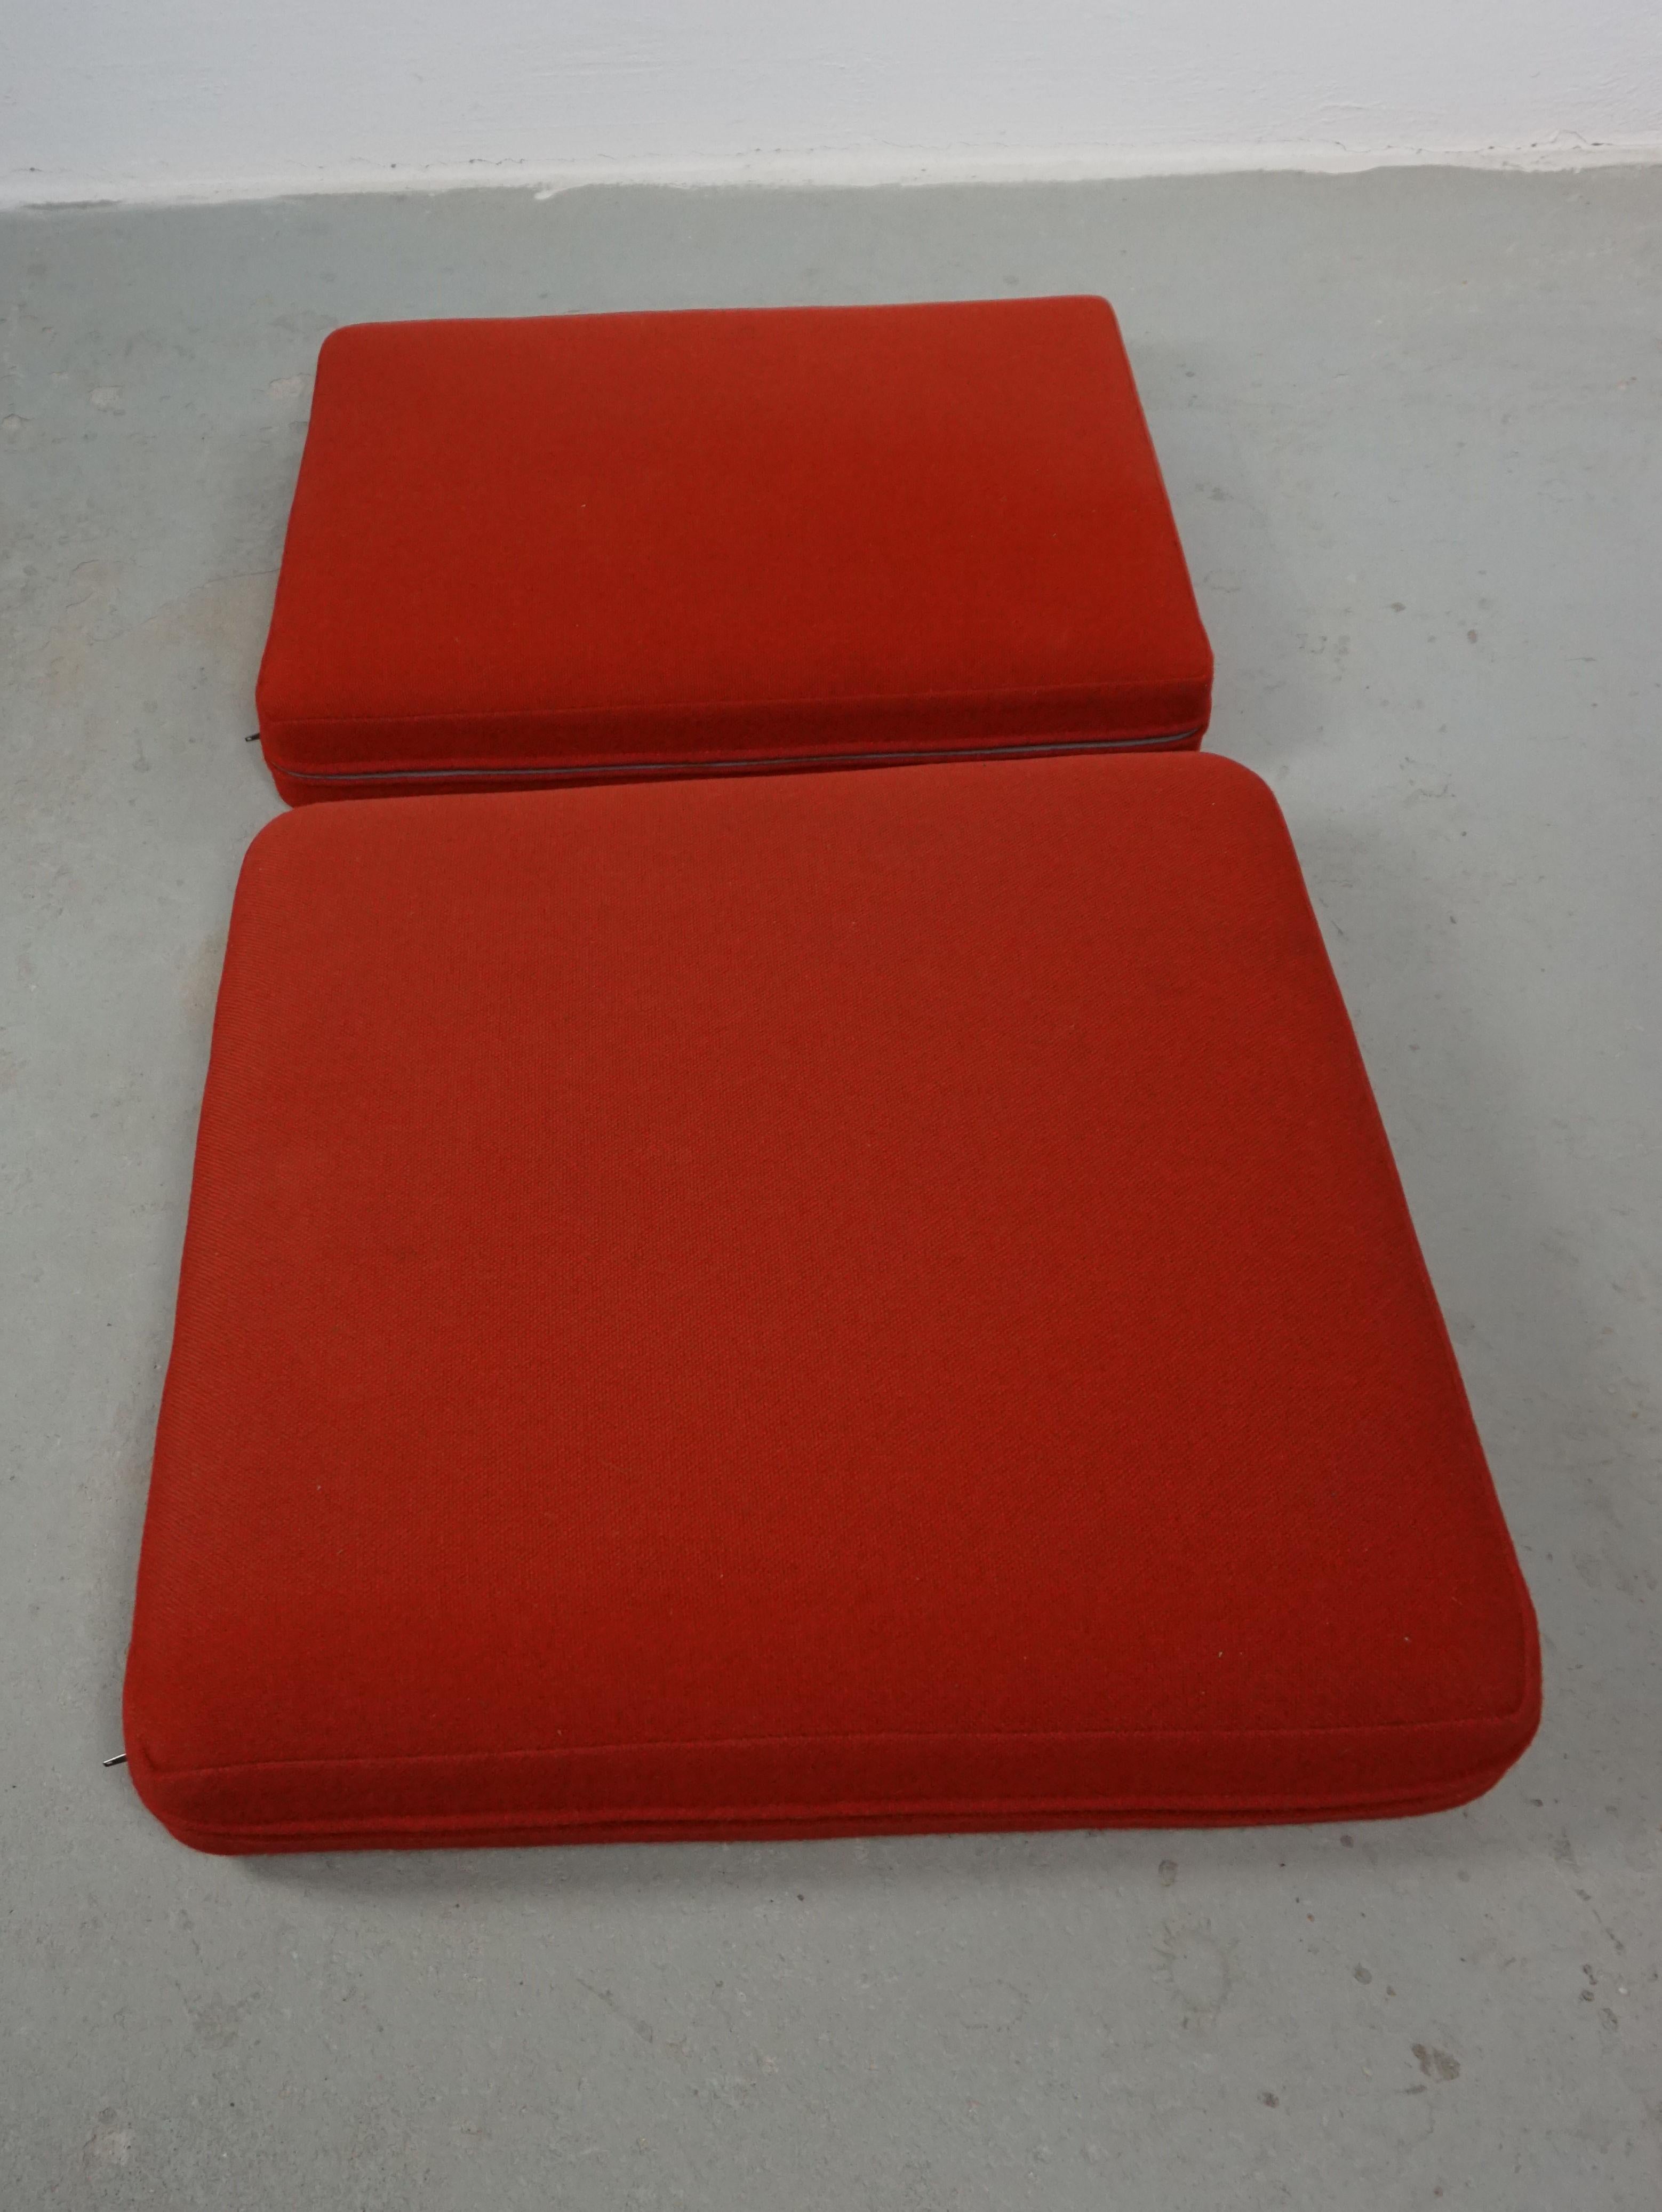 Set of seat and backrest spring cushions for Hans J. Wegner GE 290 lounge chair

Rare set of the original spring cushions for Hans J. Wegners GE 290 lounge chairs. The original spring cushions for the Wegner designs were many years ago replaced by